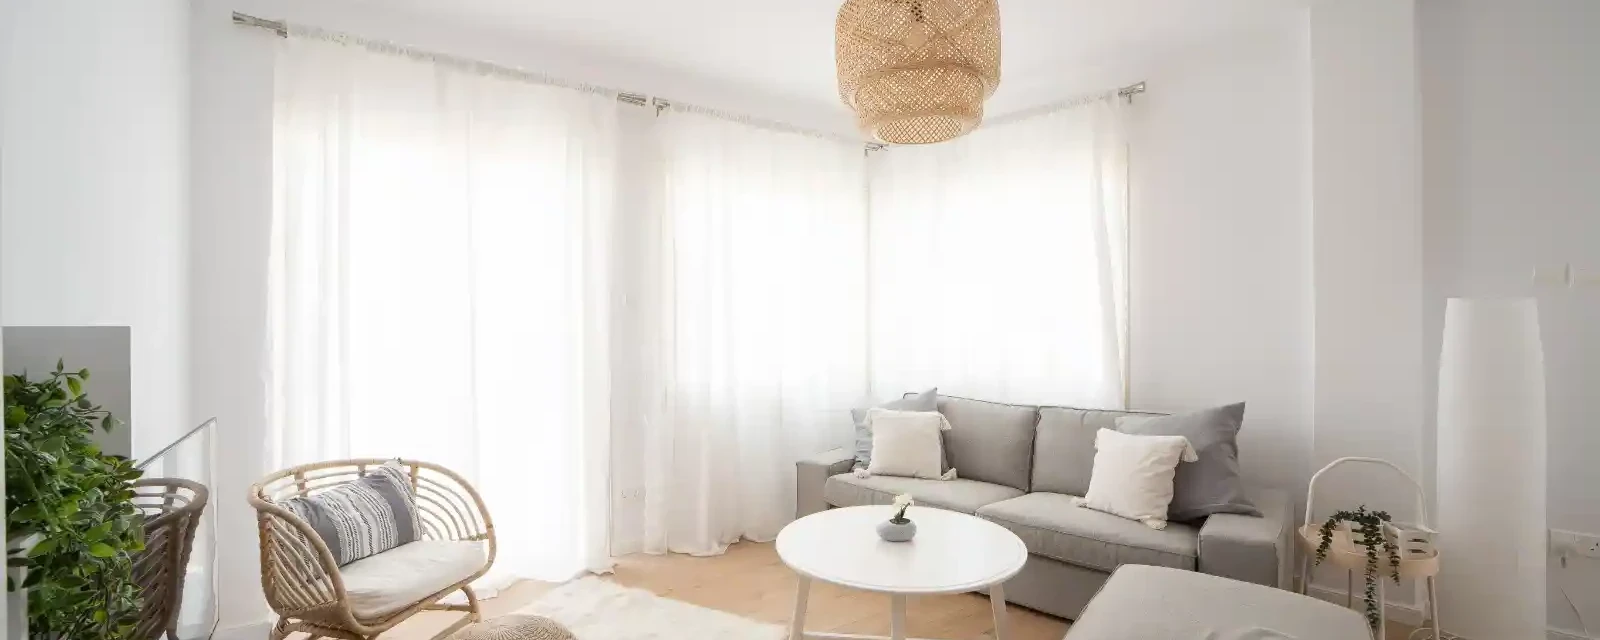 3-bedroom apartment to rent €1.900, image 1